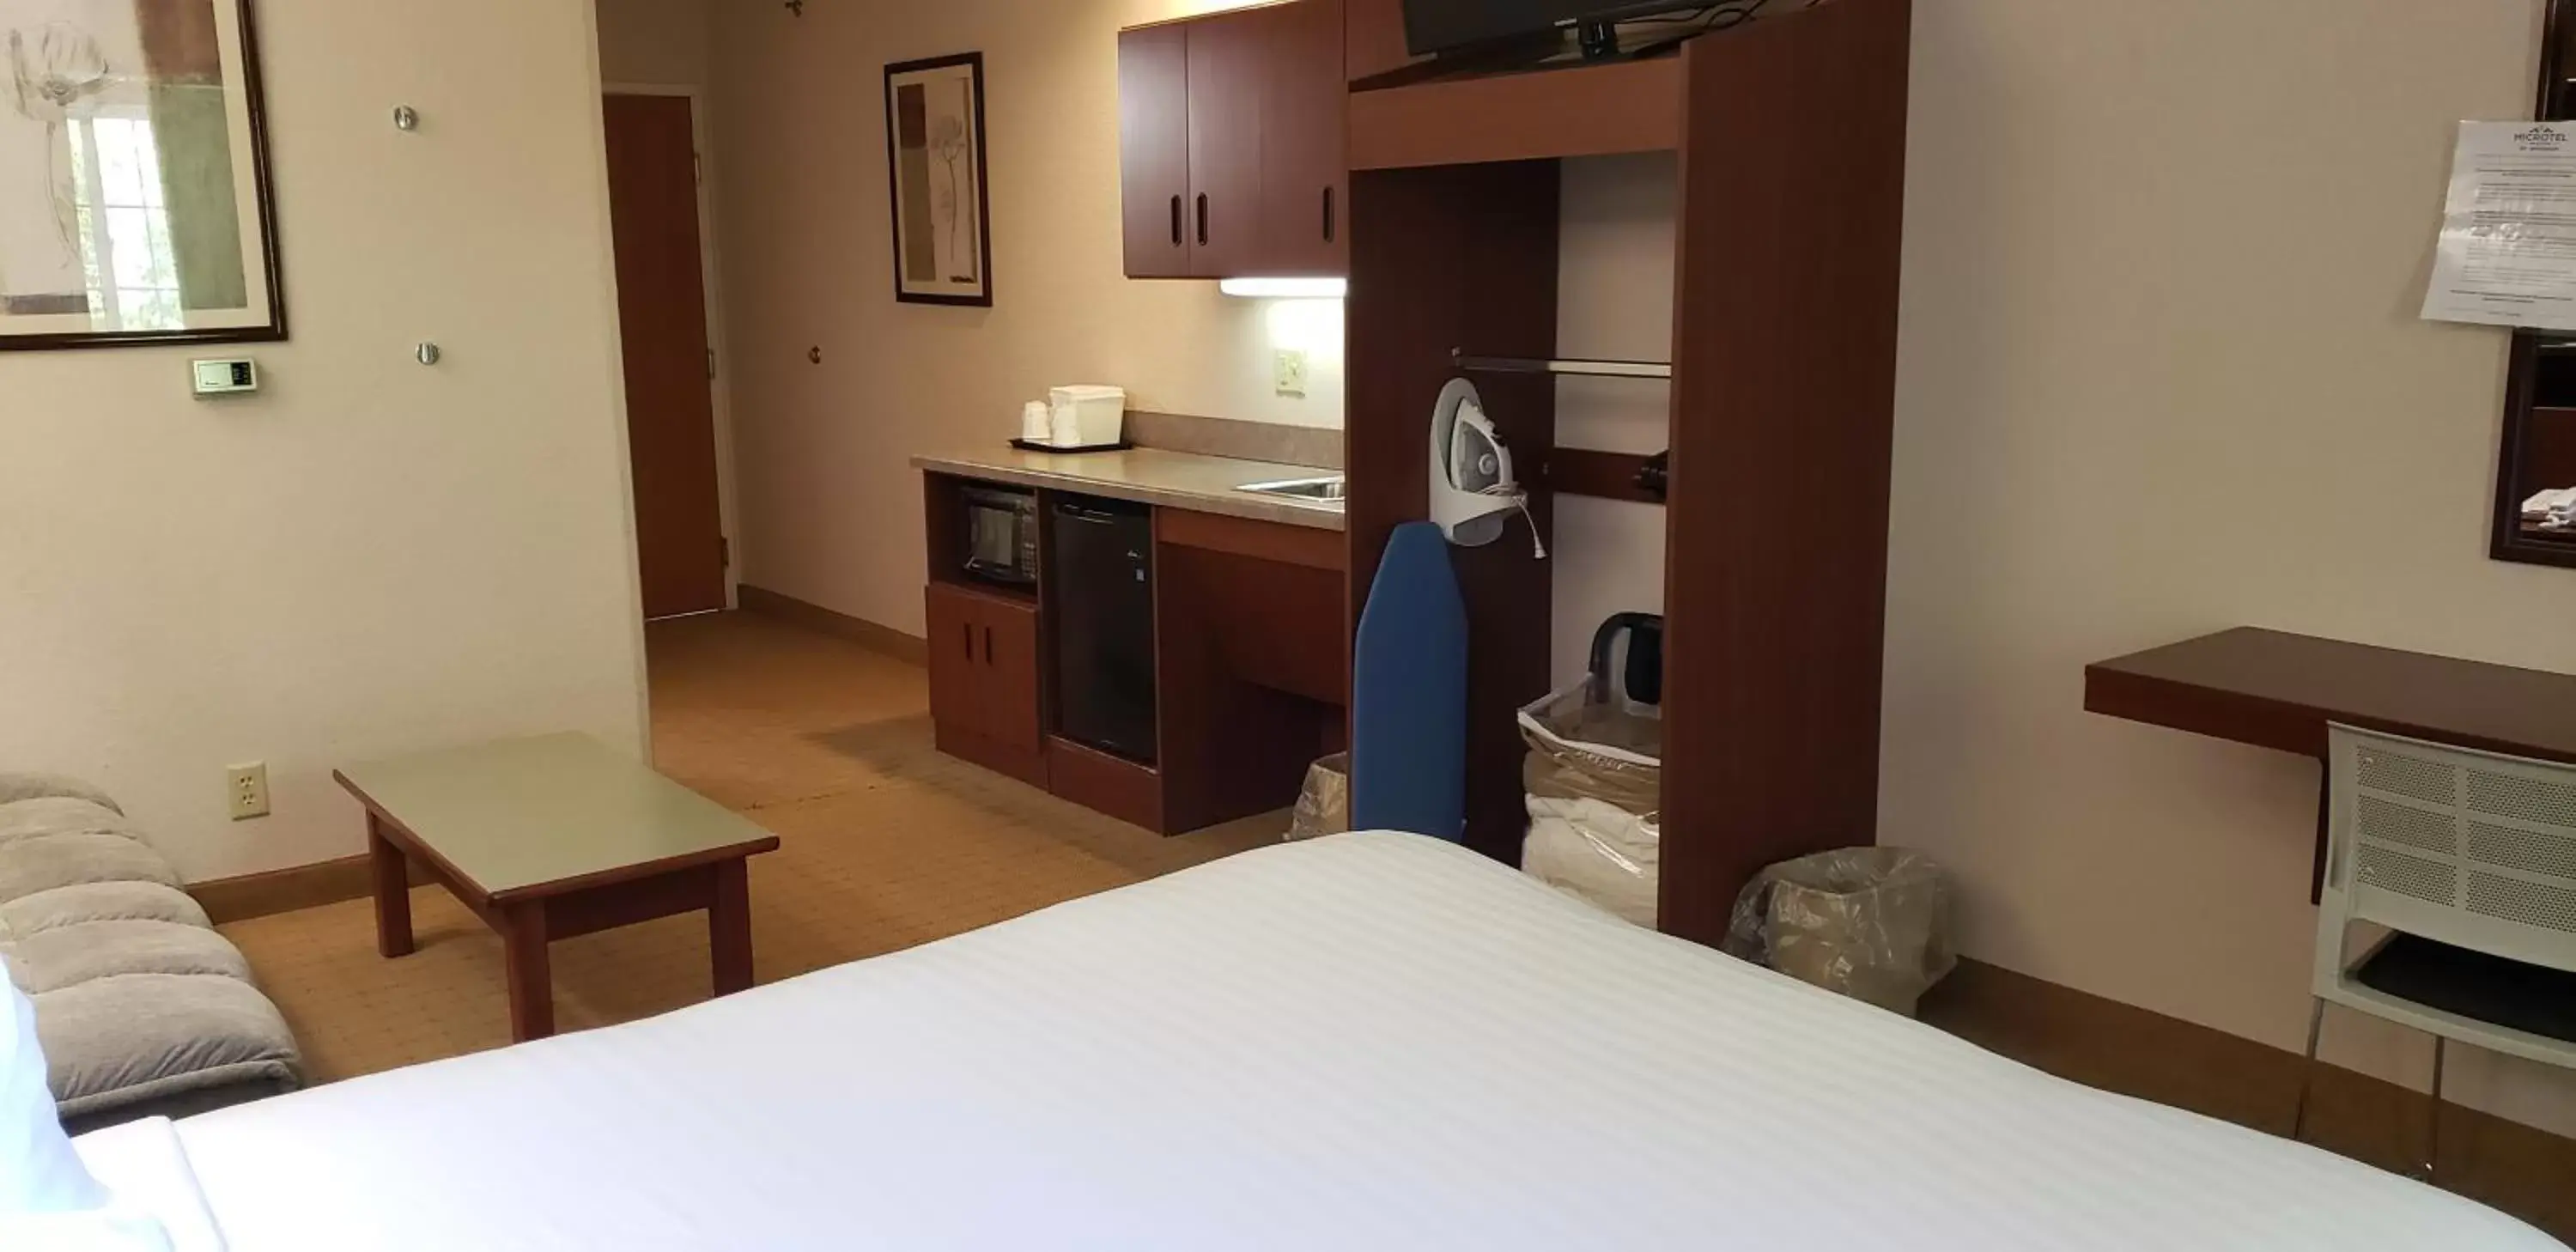 Bed in Microtel Inn & Suites by Wyndham Wellsville